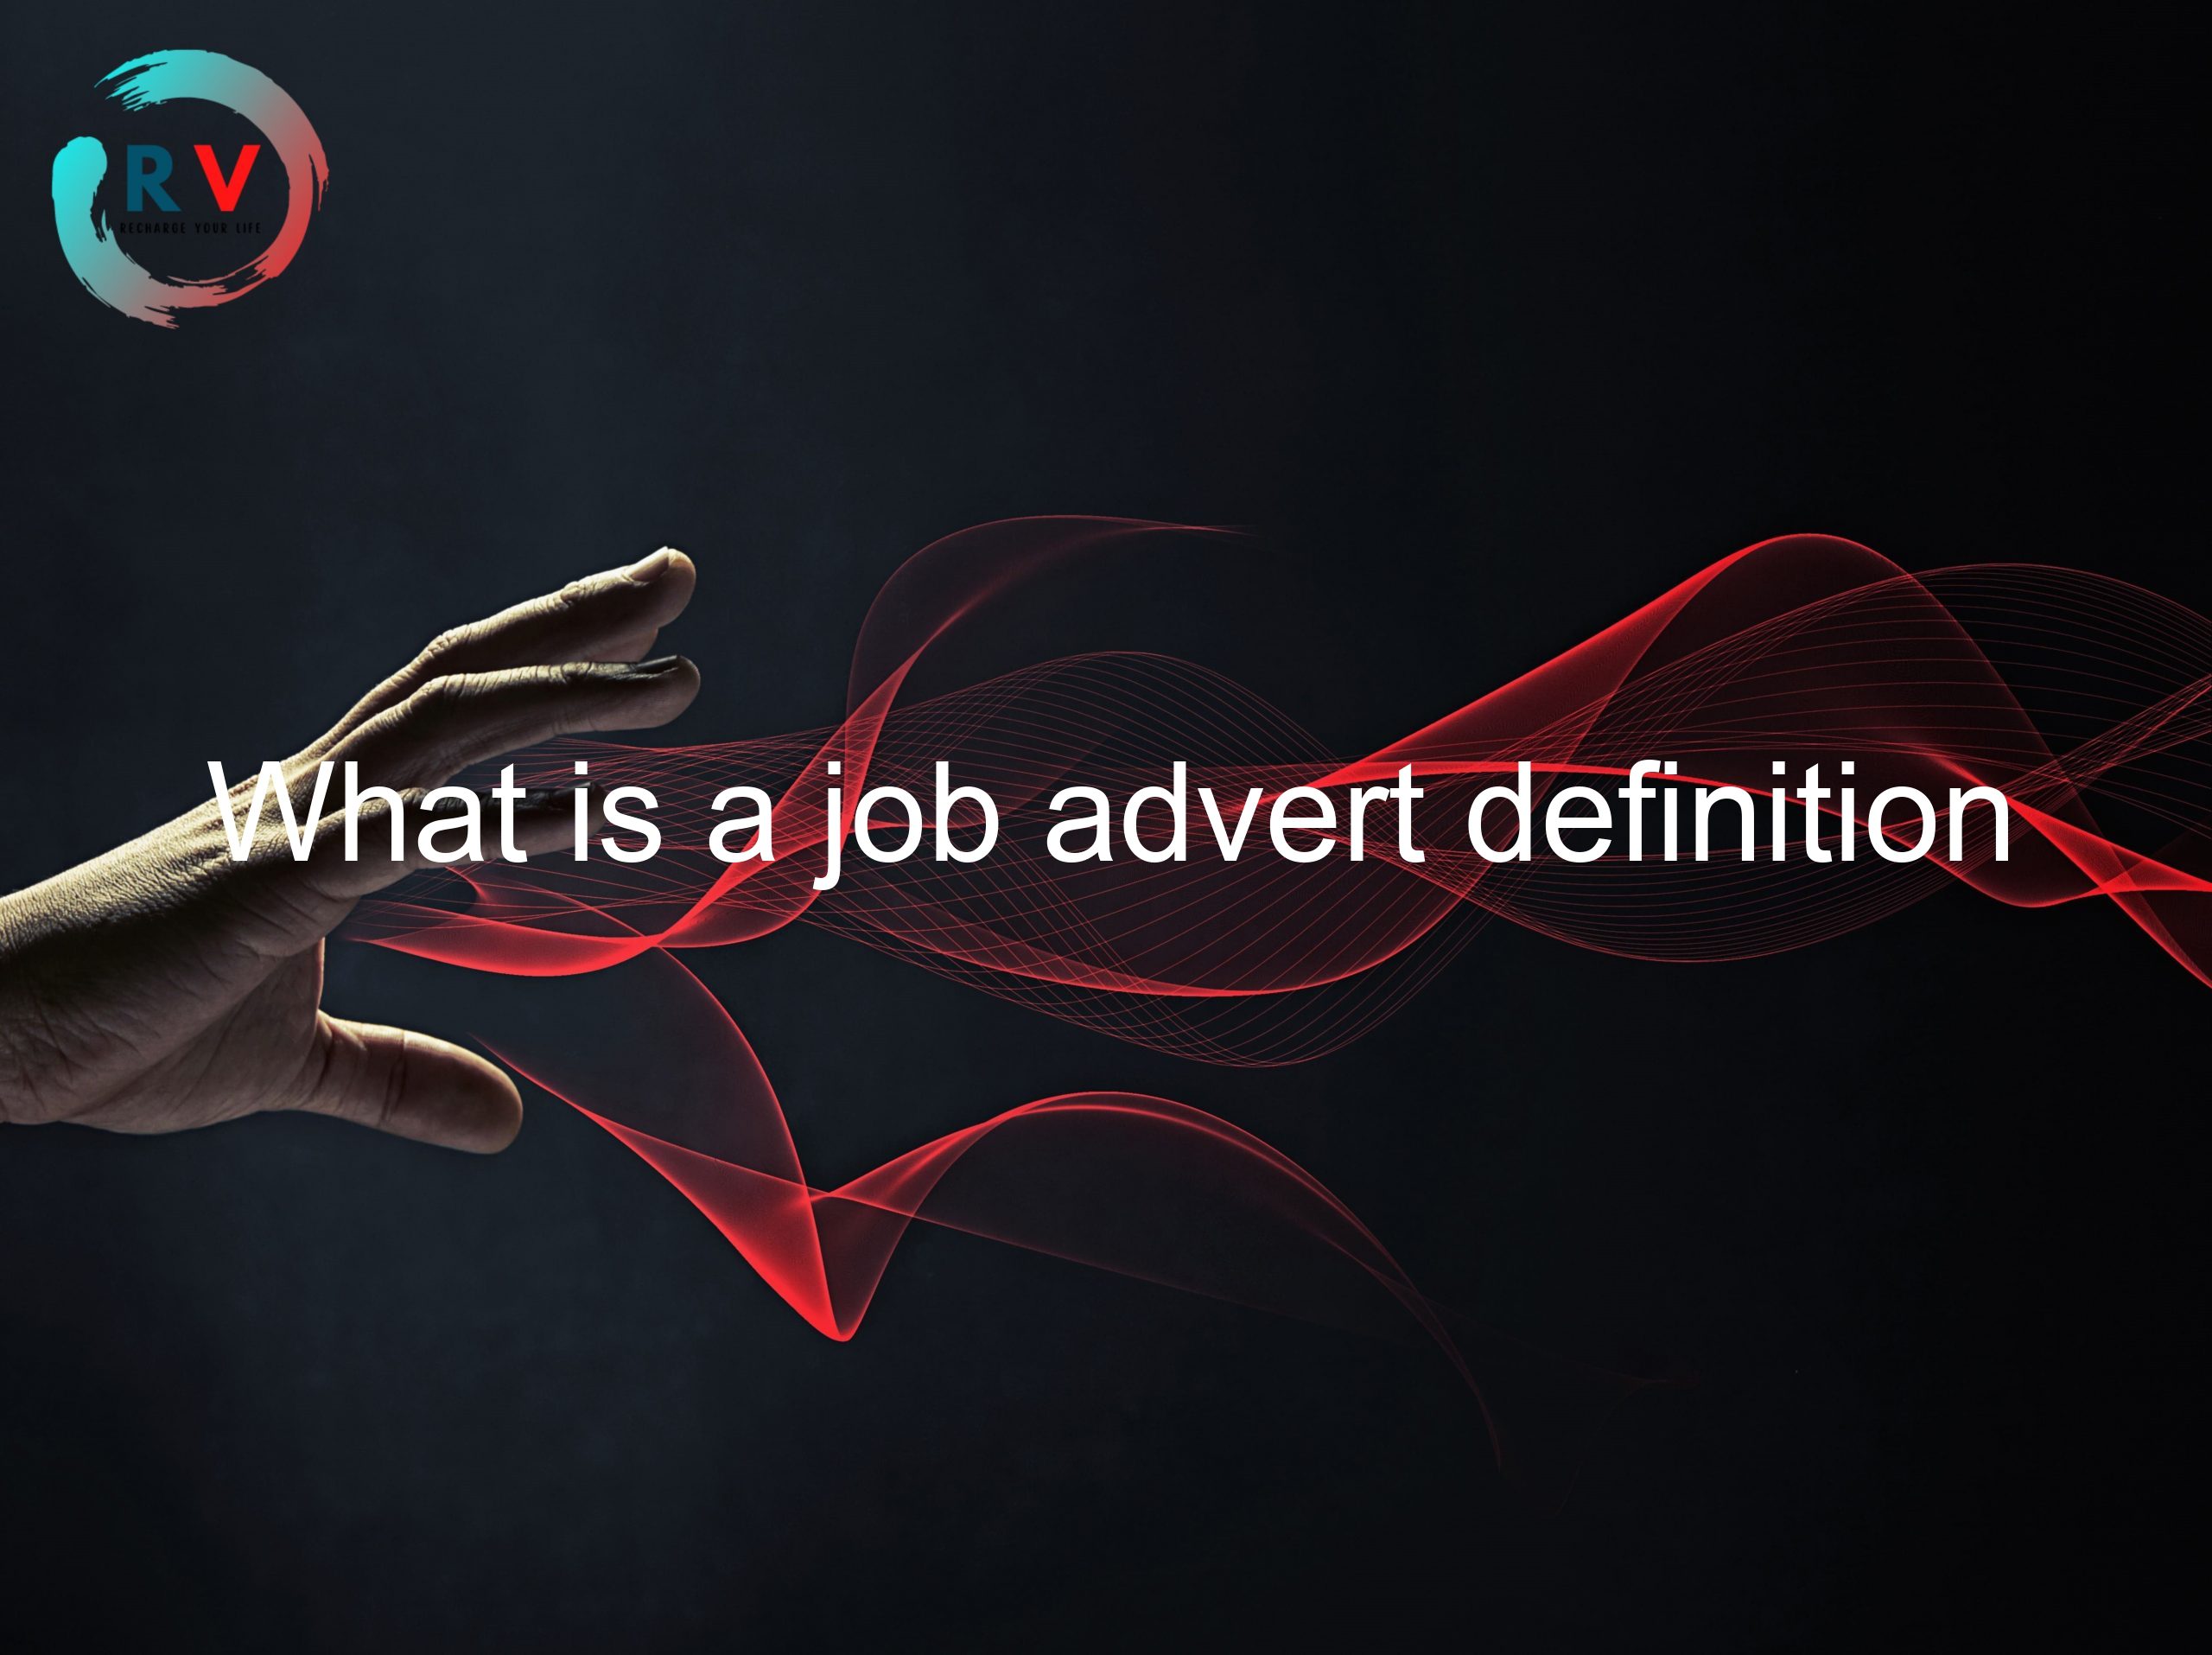 What is a job advert definition